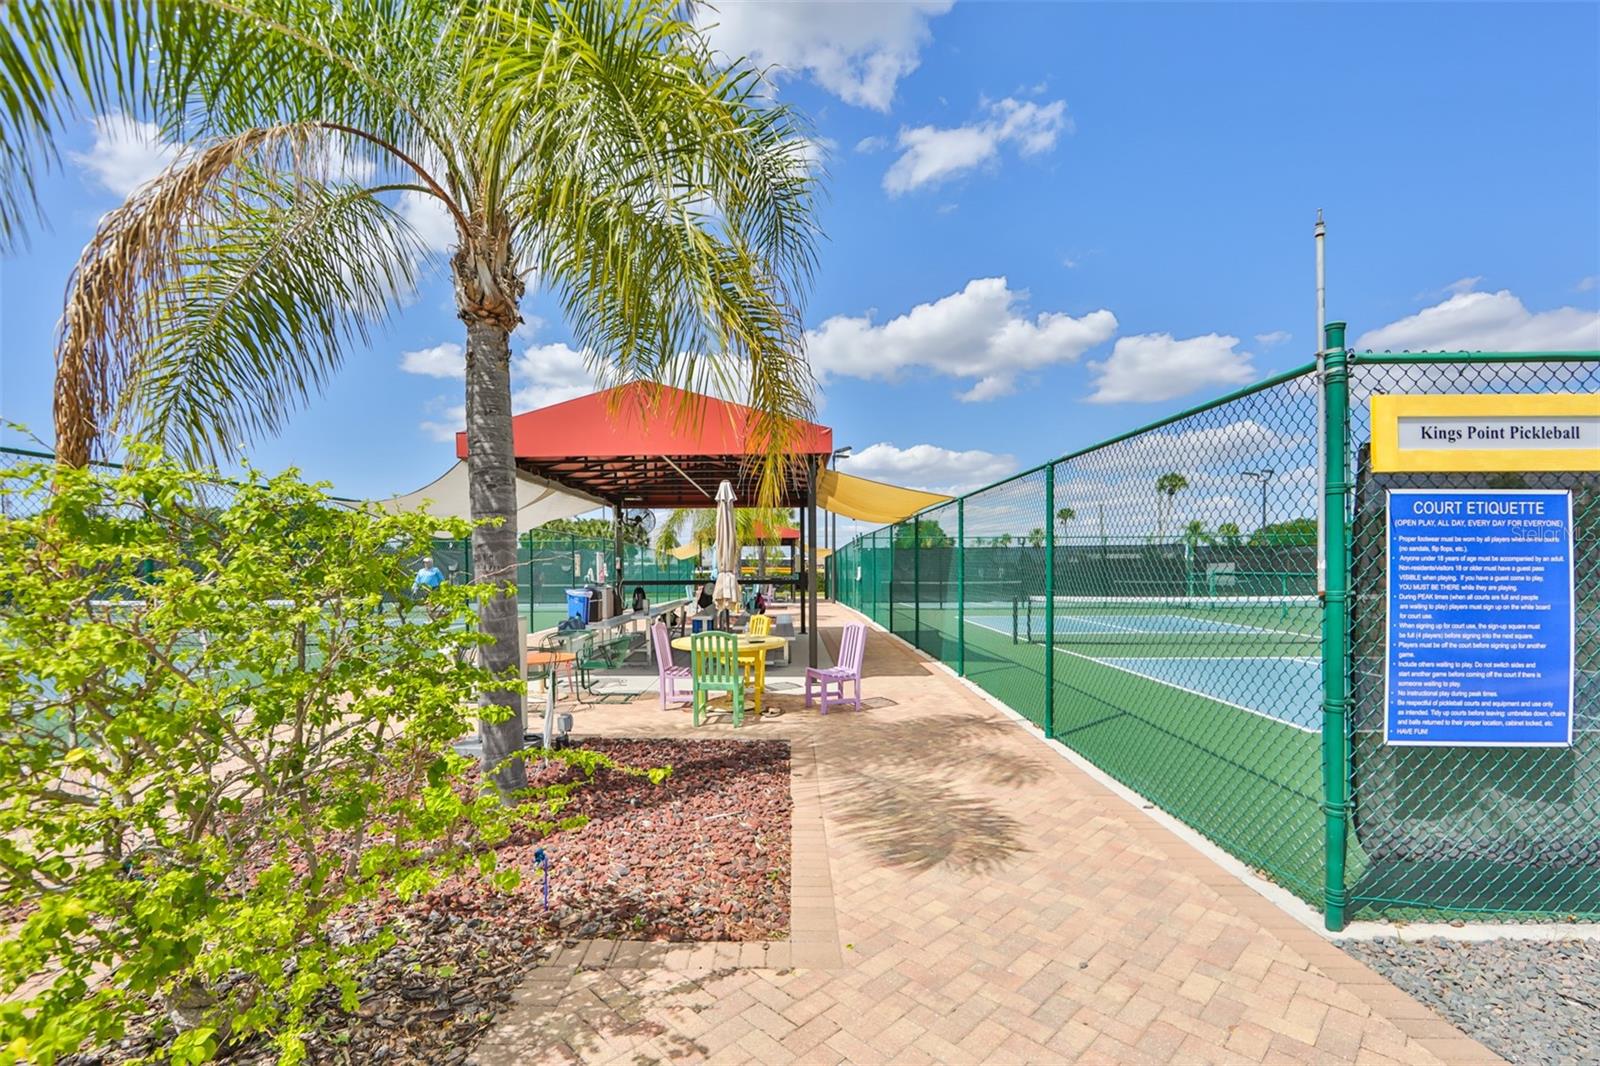 Pickleball courts are available for every level of skill.